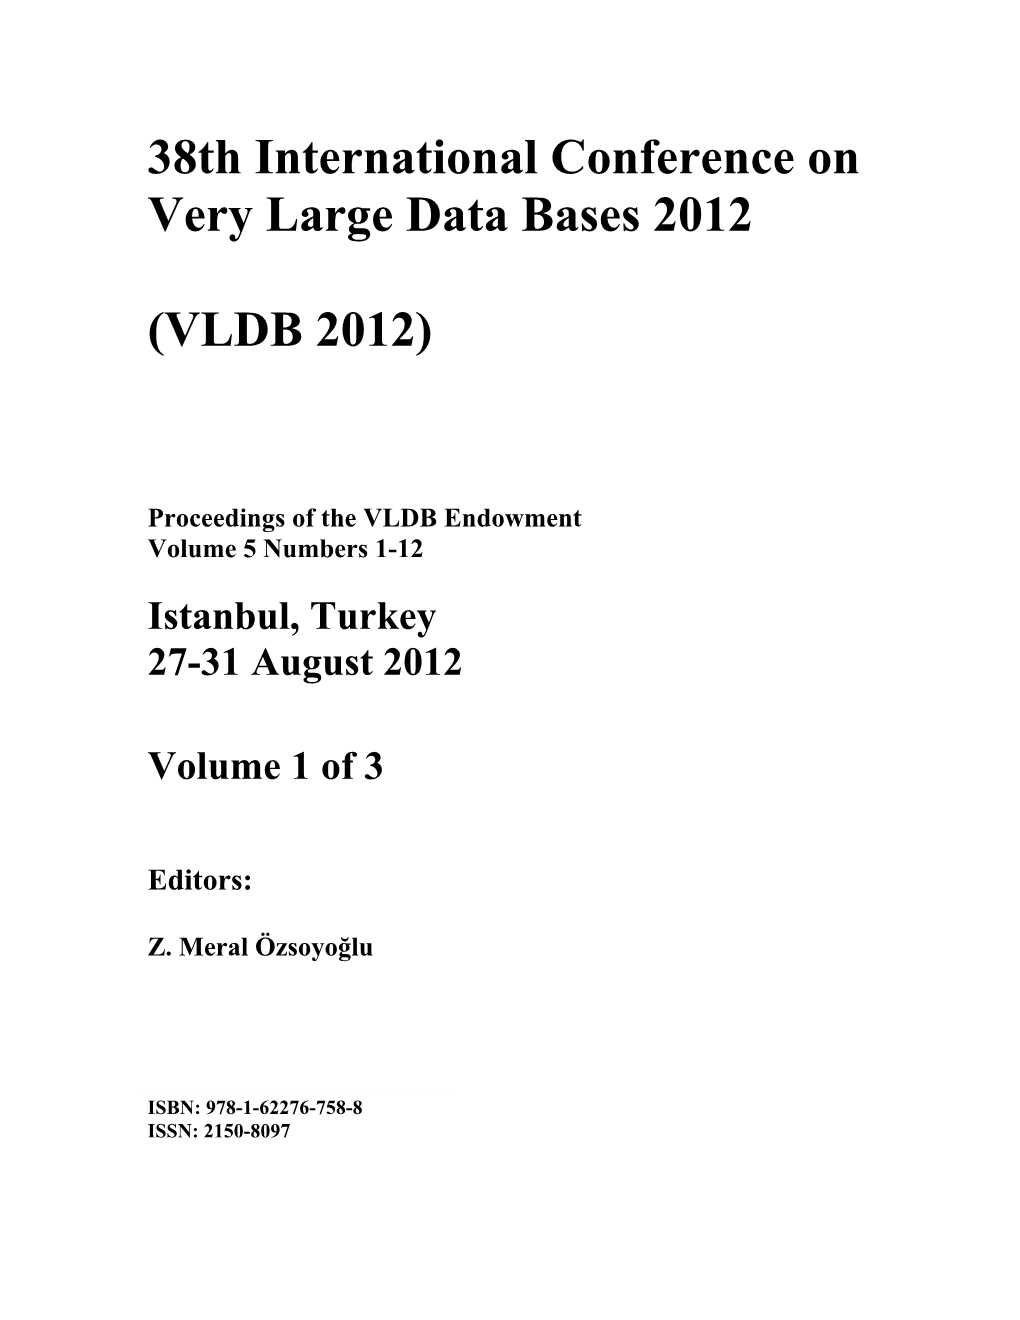 38Th International Conference on Very Large Data Bases 2012